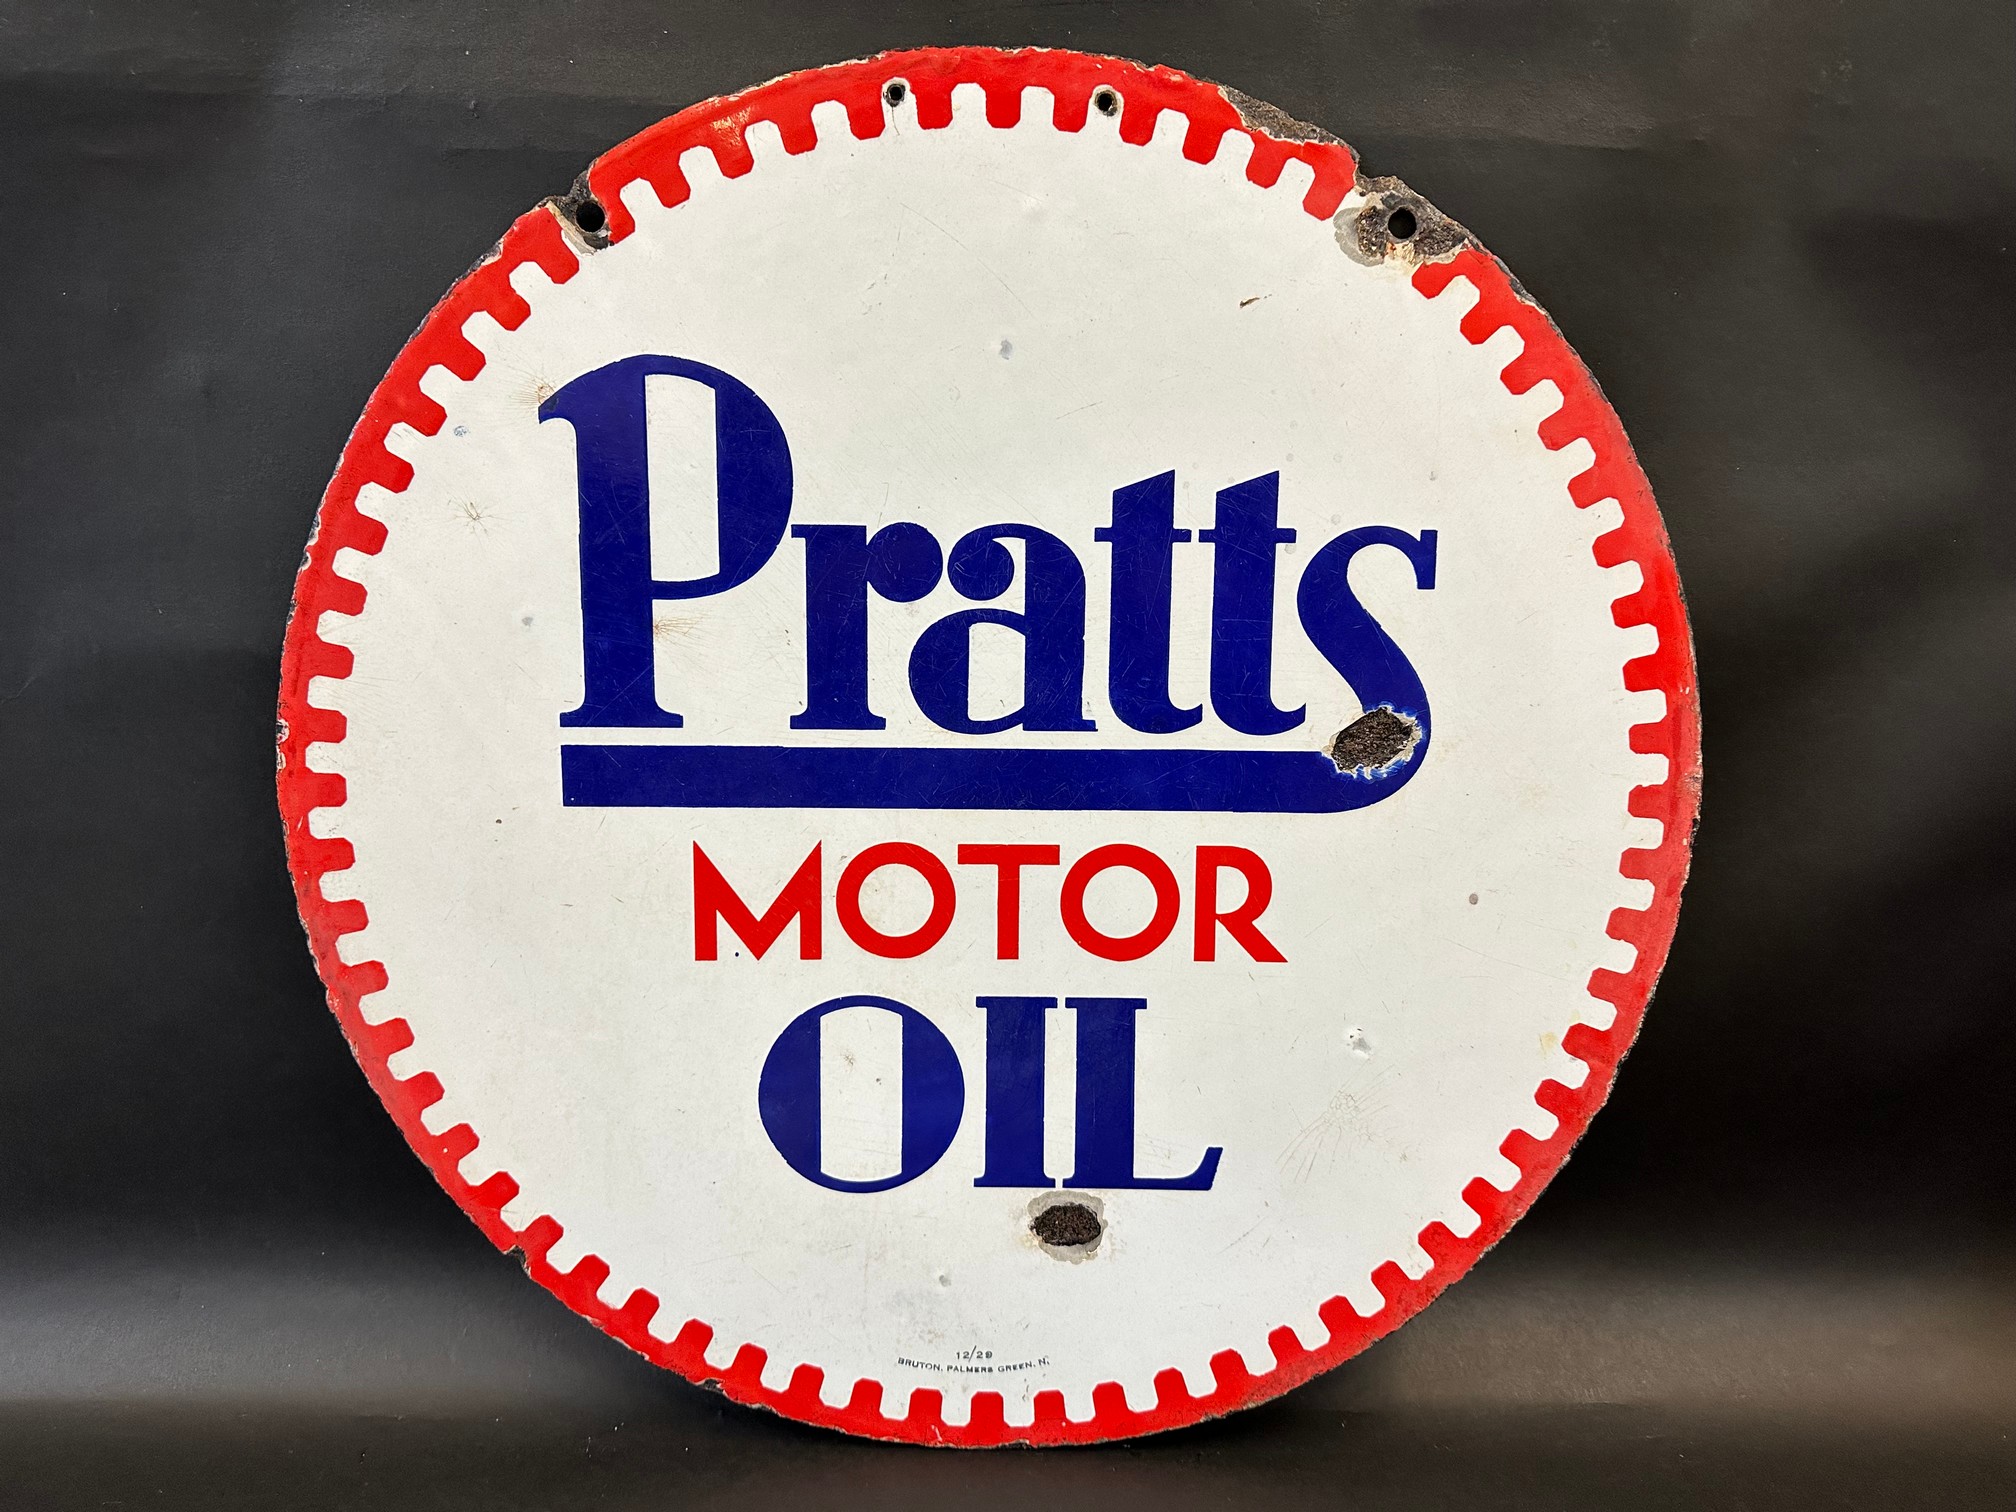 A Pratts Motor Oil circular double sided enamel sign by Bruton of Palmers Green, dated December